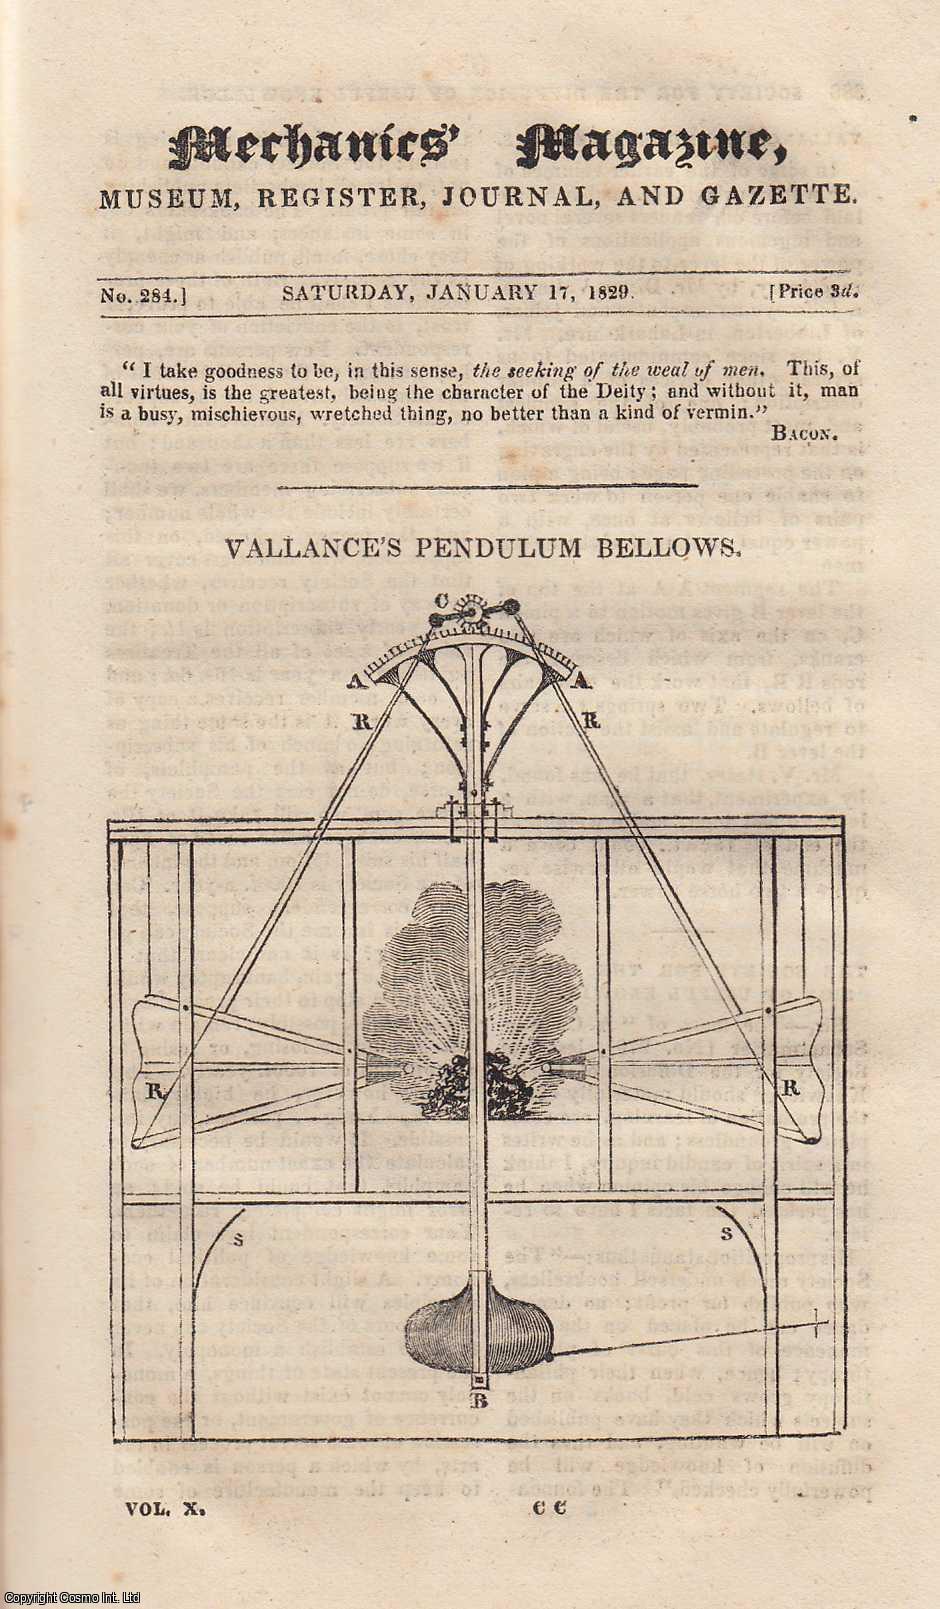 ---. - Vallance's Pendulum Bellows; Improved Mode of Filling Oil Lamps; Perpetual Motion; Solutions of Mr. Utting's Questions on The Acceleration of Falling Bodies, etc. Mechanics Magazine, Museum, Register, Journal and Gazette. Issue No. 284. A complete rare weekly issue of the Mechanics' Magazine, 1829.